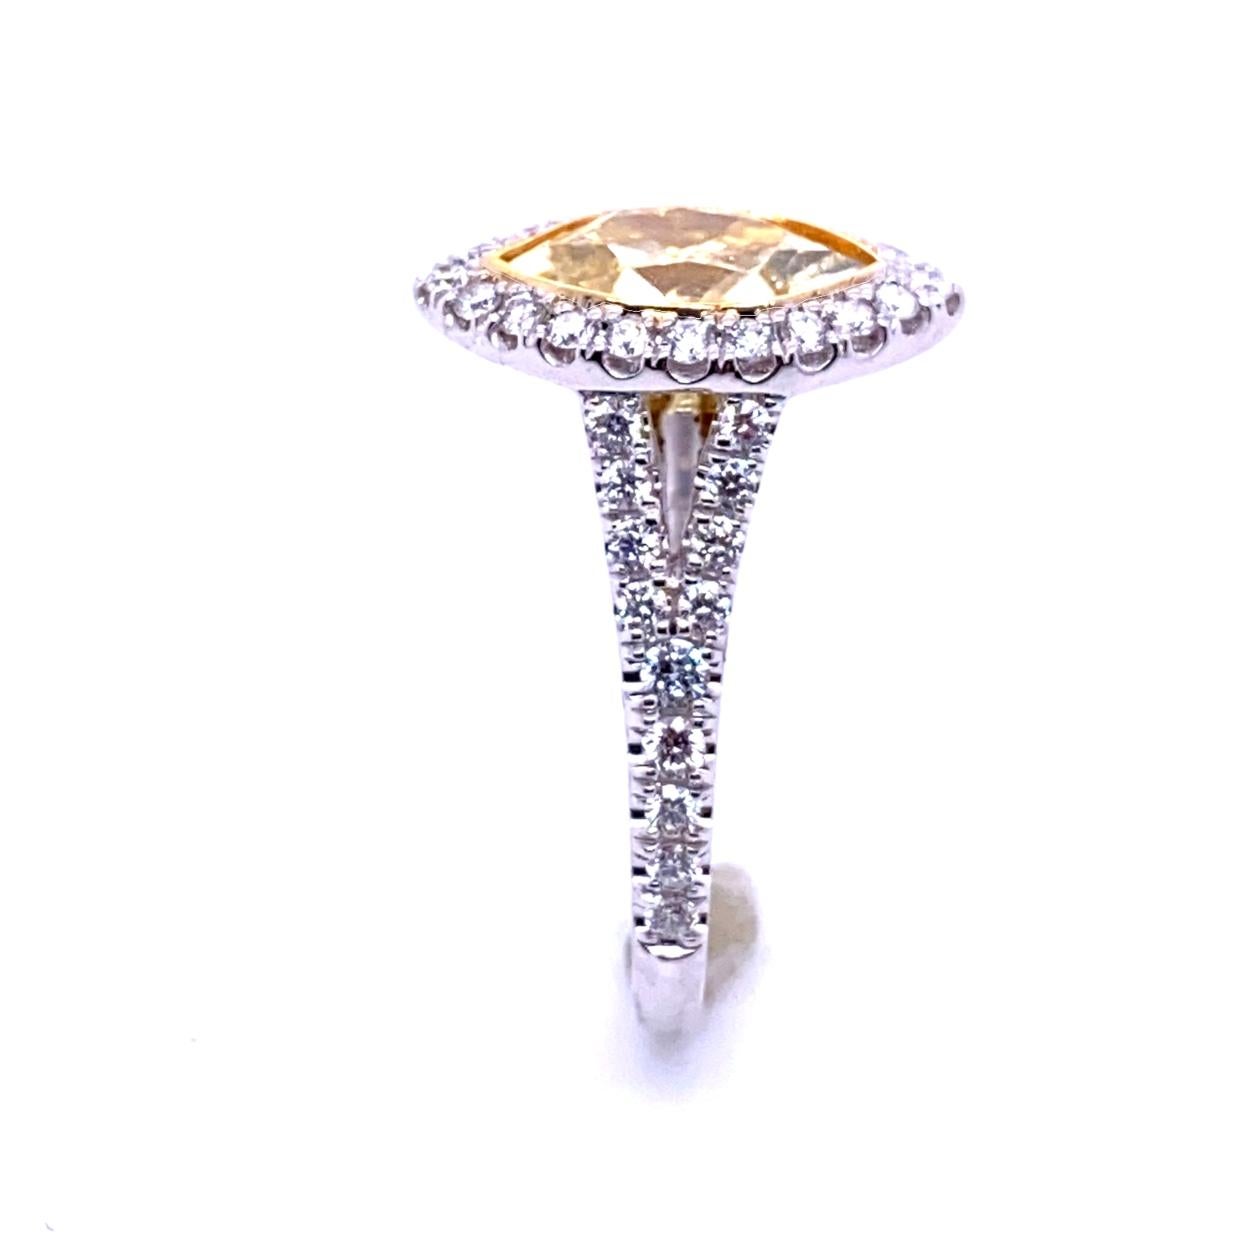 1.5 Carat Yellow MQ Diamond in Pave Set 18 Karat Split Shank Ring with Halo In New Condition For Sale In Los Angeles, CA